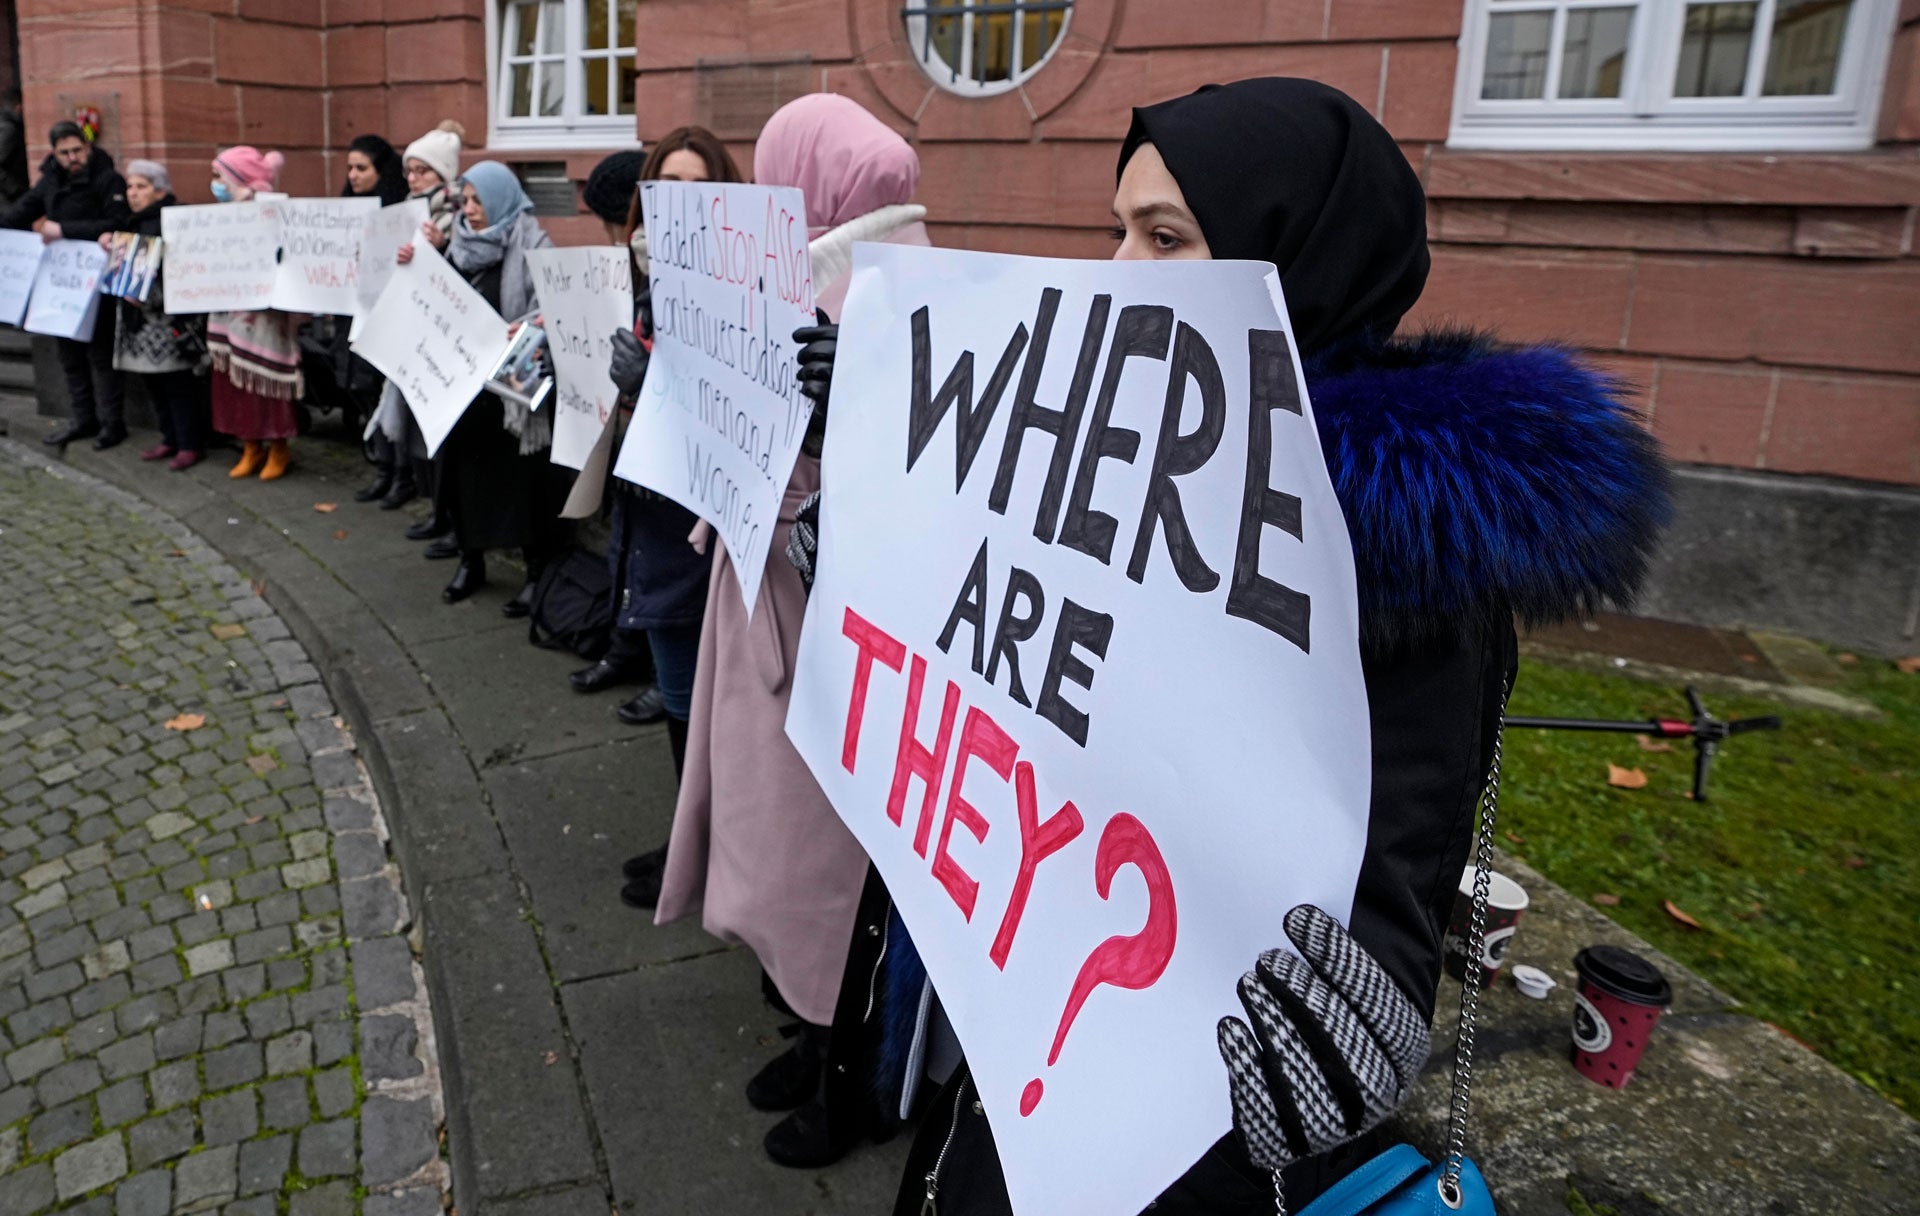 Women hold banners with phrases on them. One reads, "Where are they?"